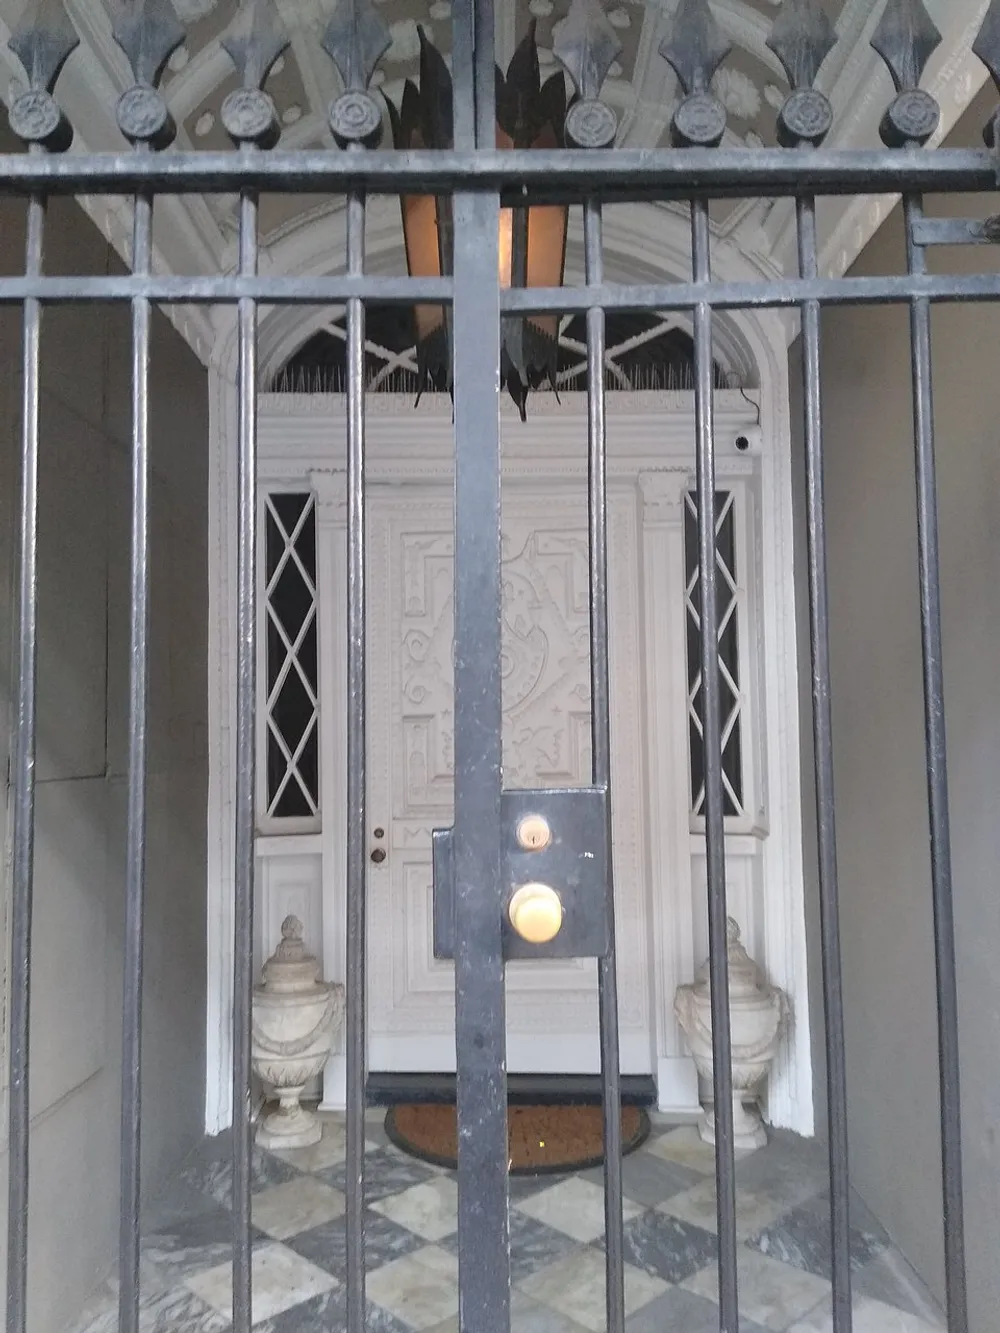 An ornate white door is visible behind a set of metal bars flanked by classical-style urns and complemented by a bell push button and intercom system